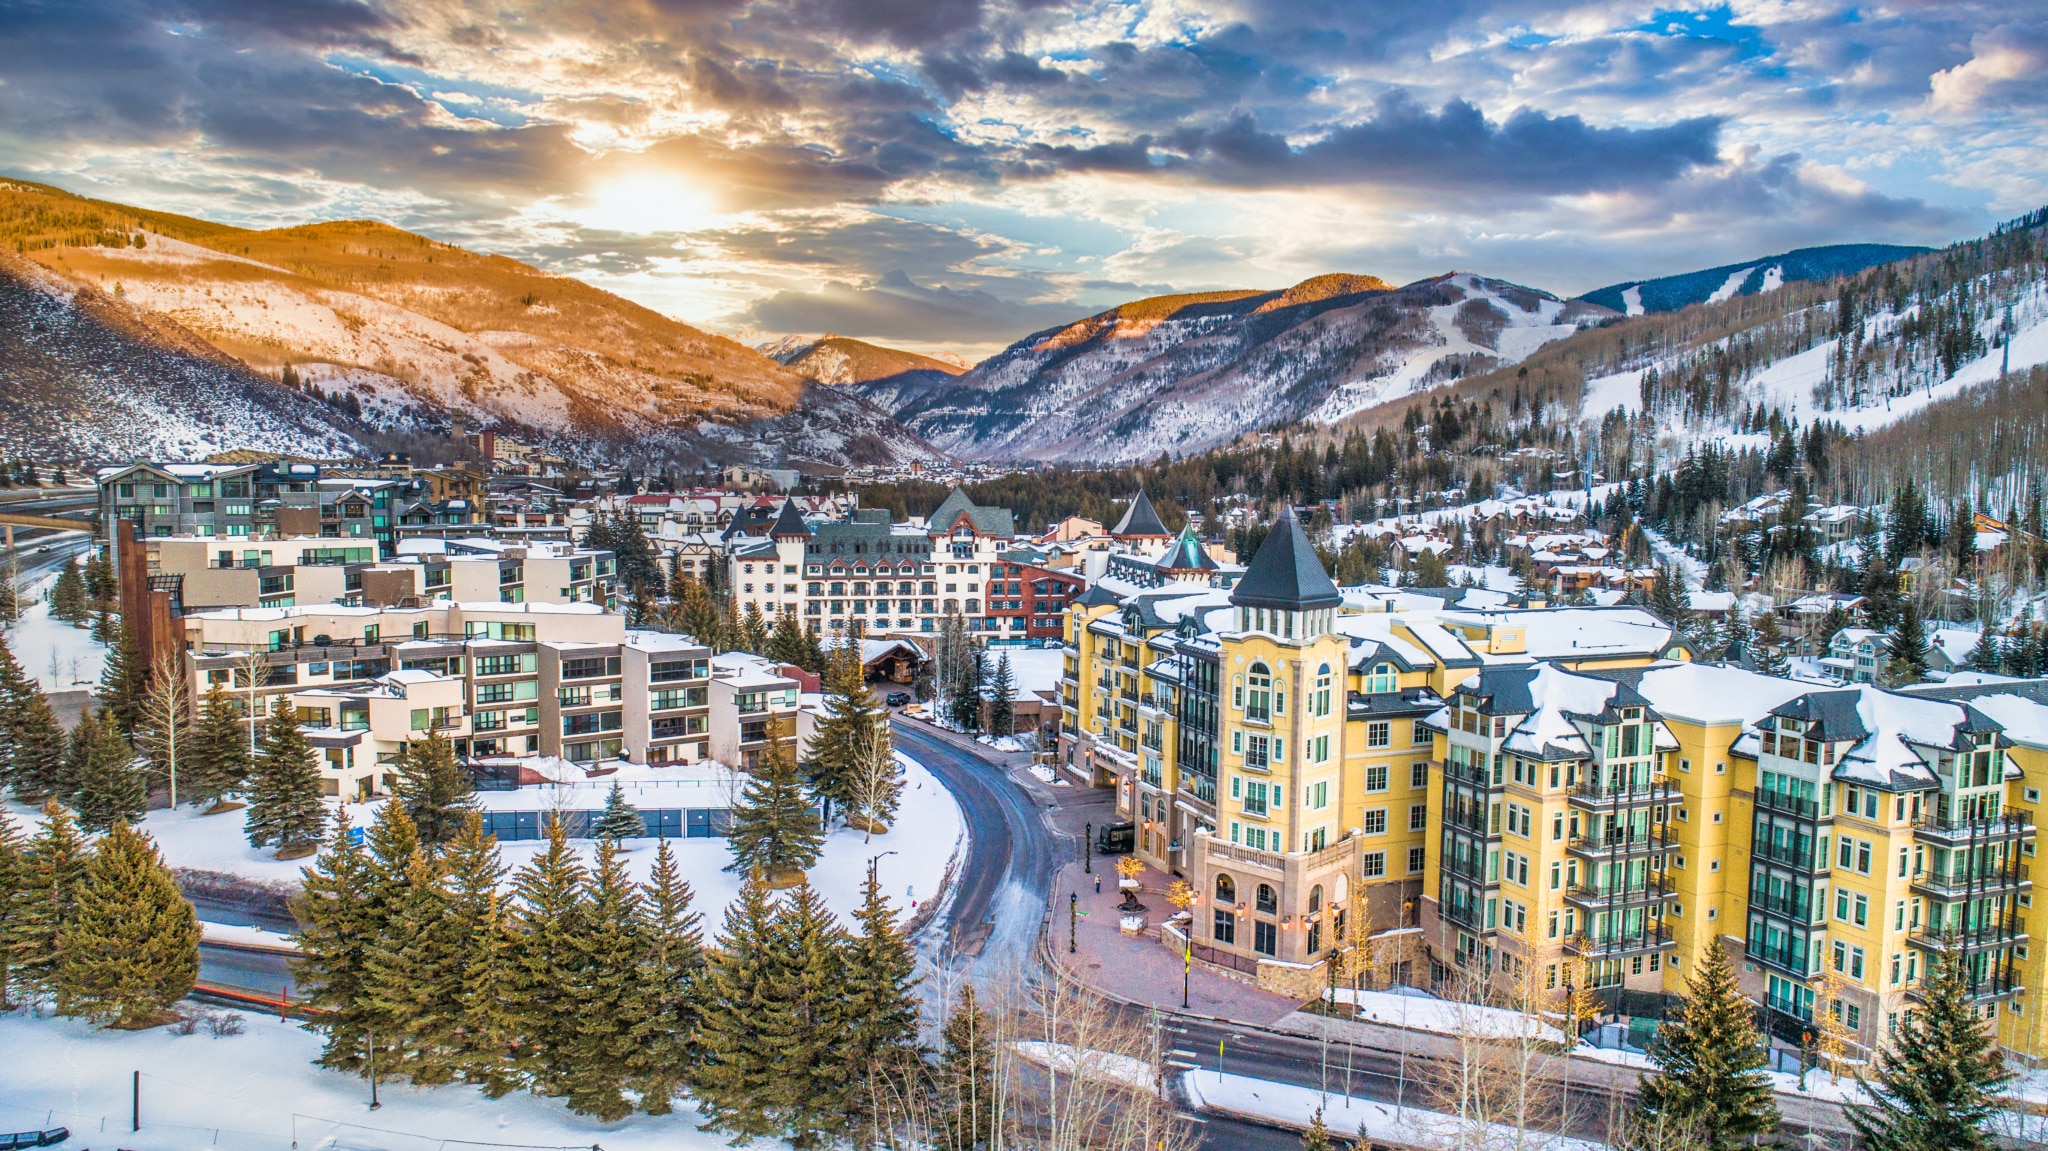 The Best Things to do in Vail, Colorado